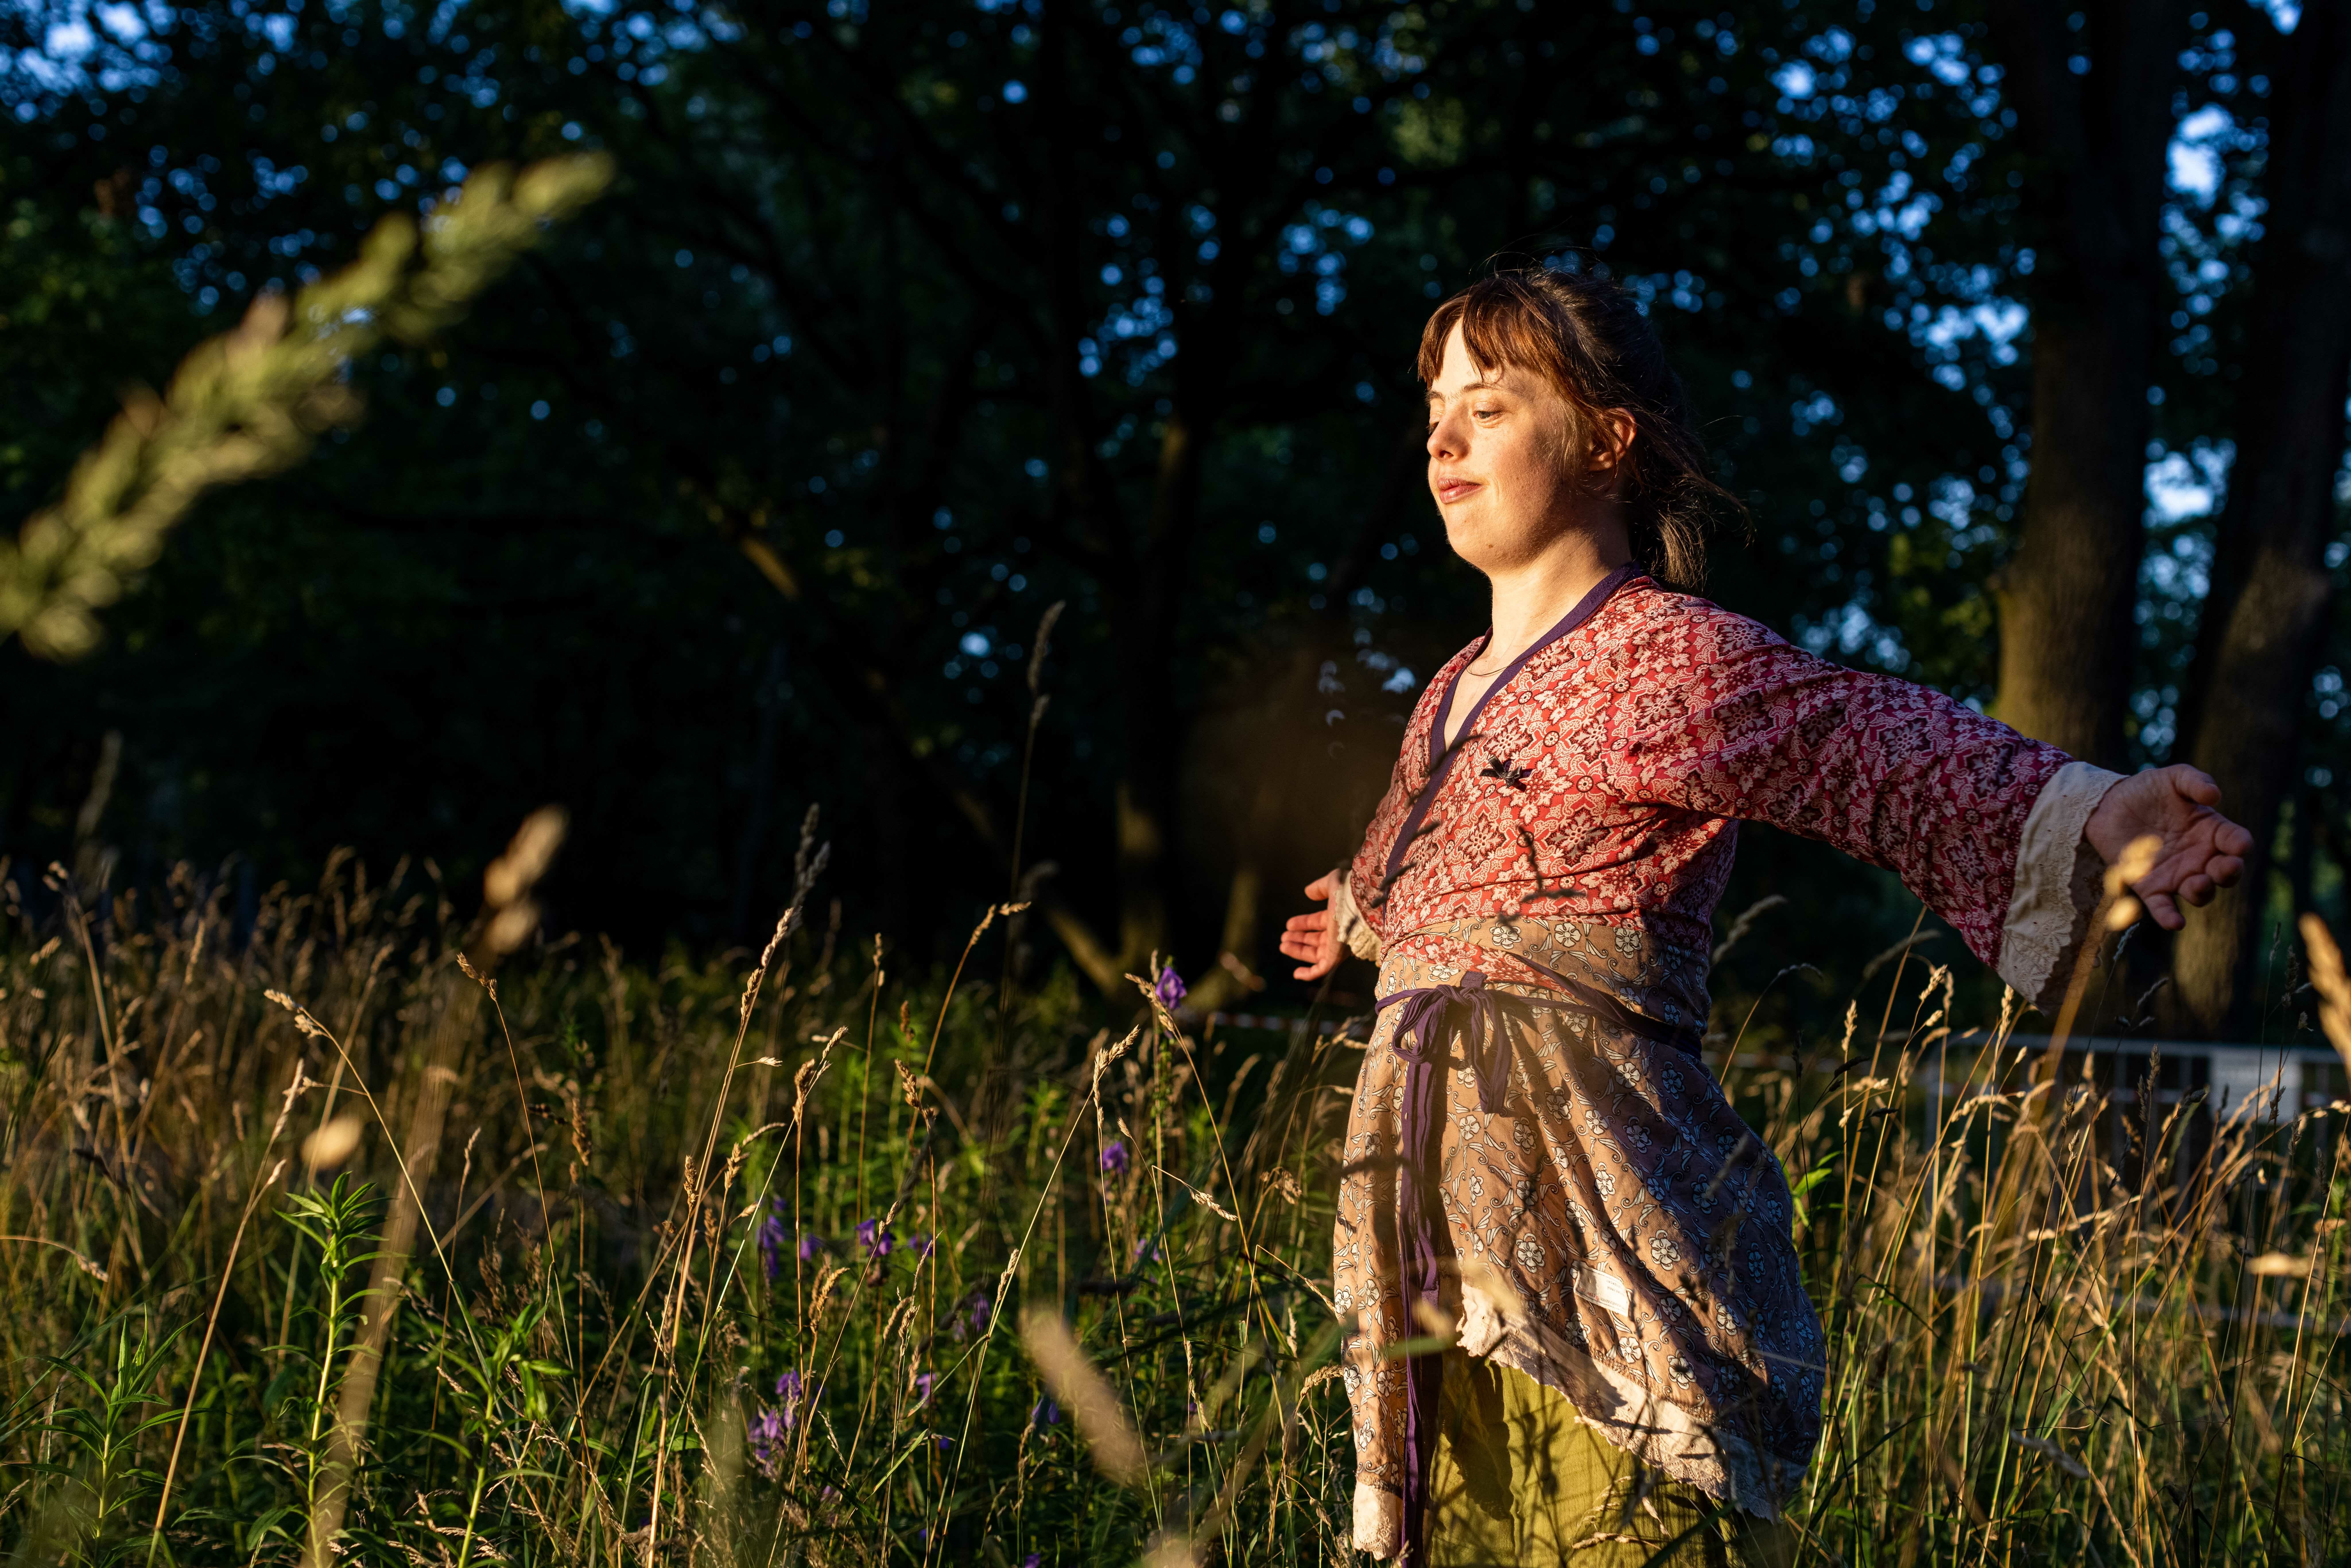 This picture shows a person in red patterned clothing, with her arms spread wide. She is standing in a meadow, with the long grass reaching her hips.